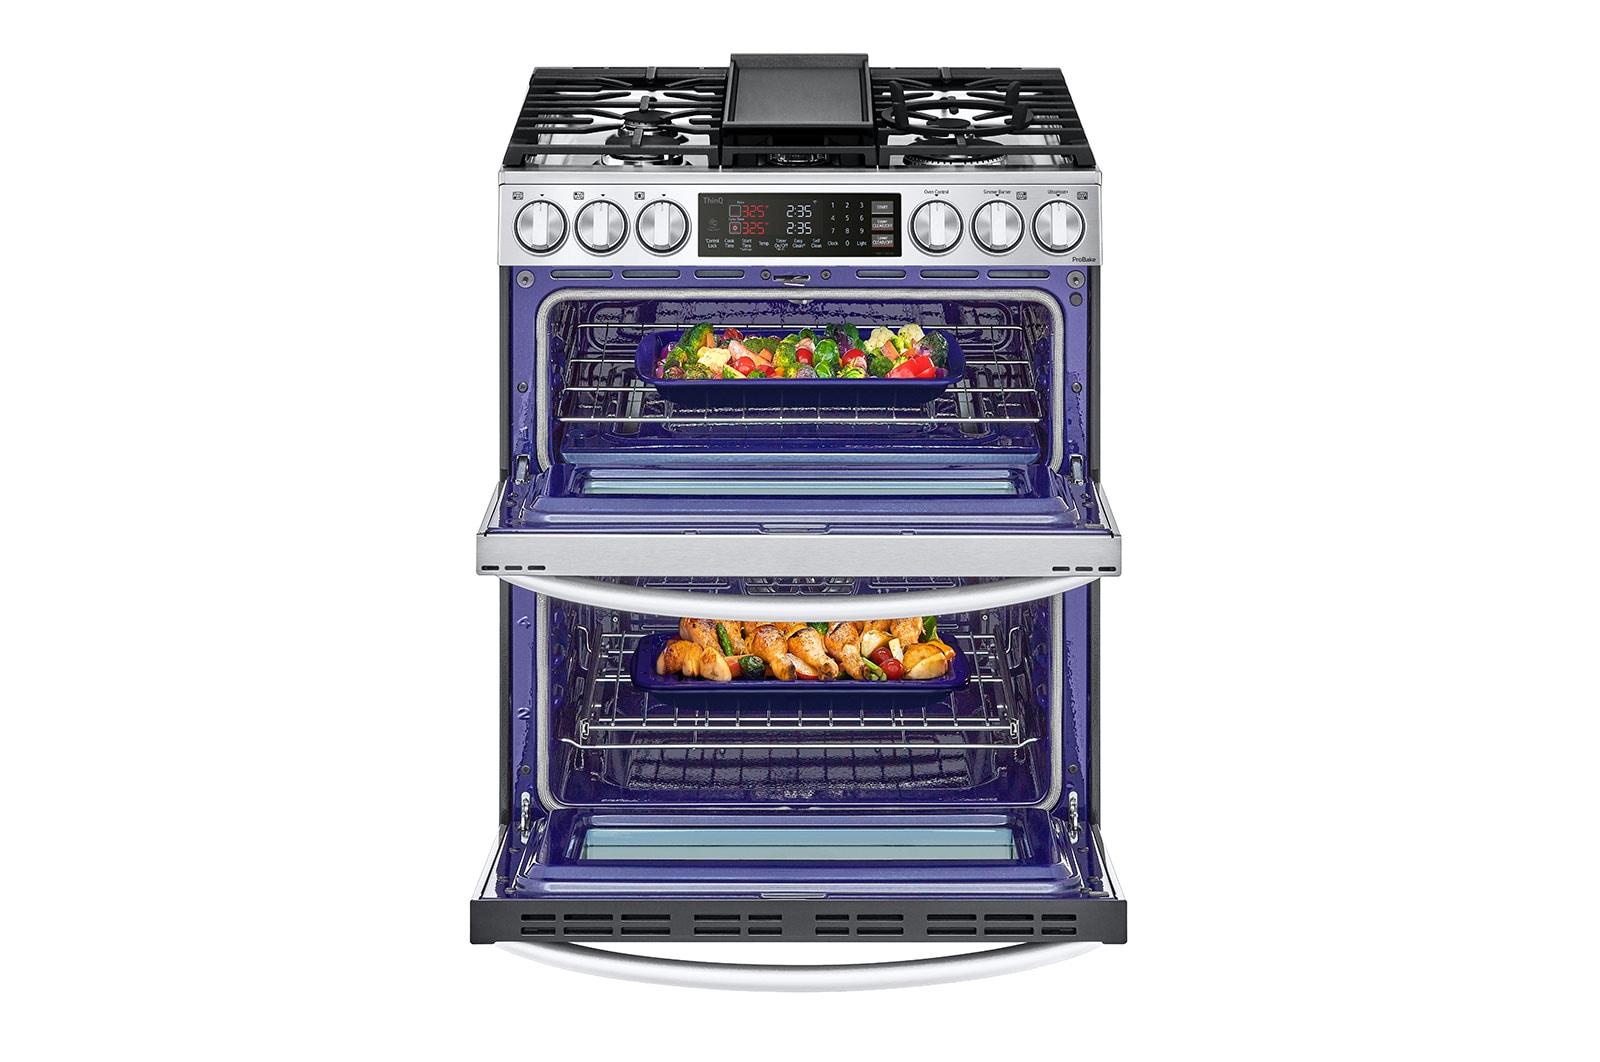 Lg 6.9 cu. ft. Smart Gas Double Oven Slide-in Range with InstaView®, ProBake® Convection, Air Fry, and Air Sous Vide